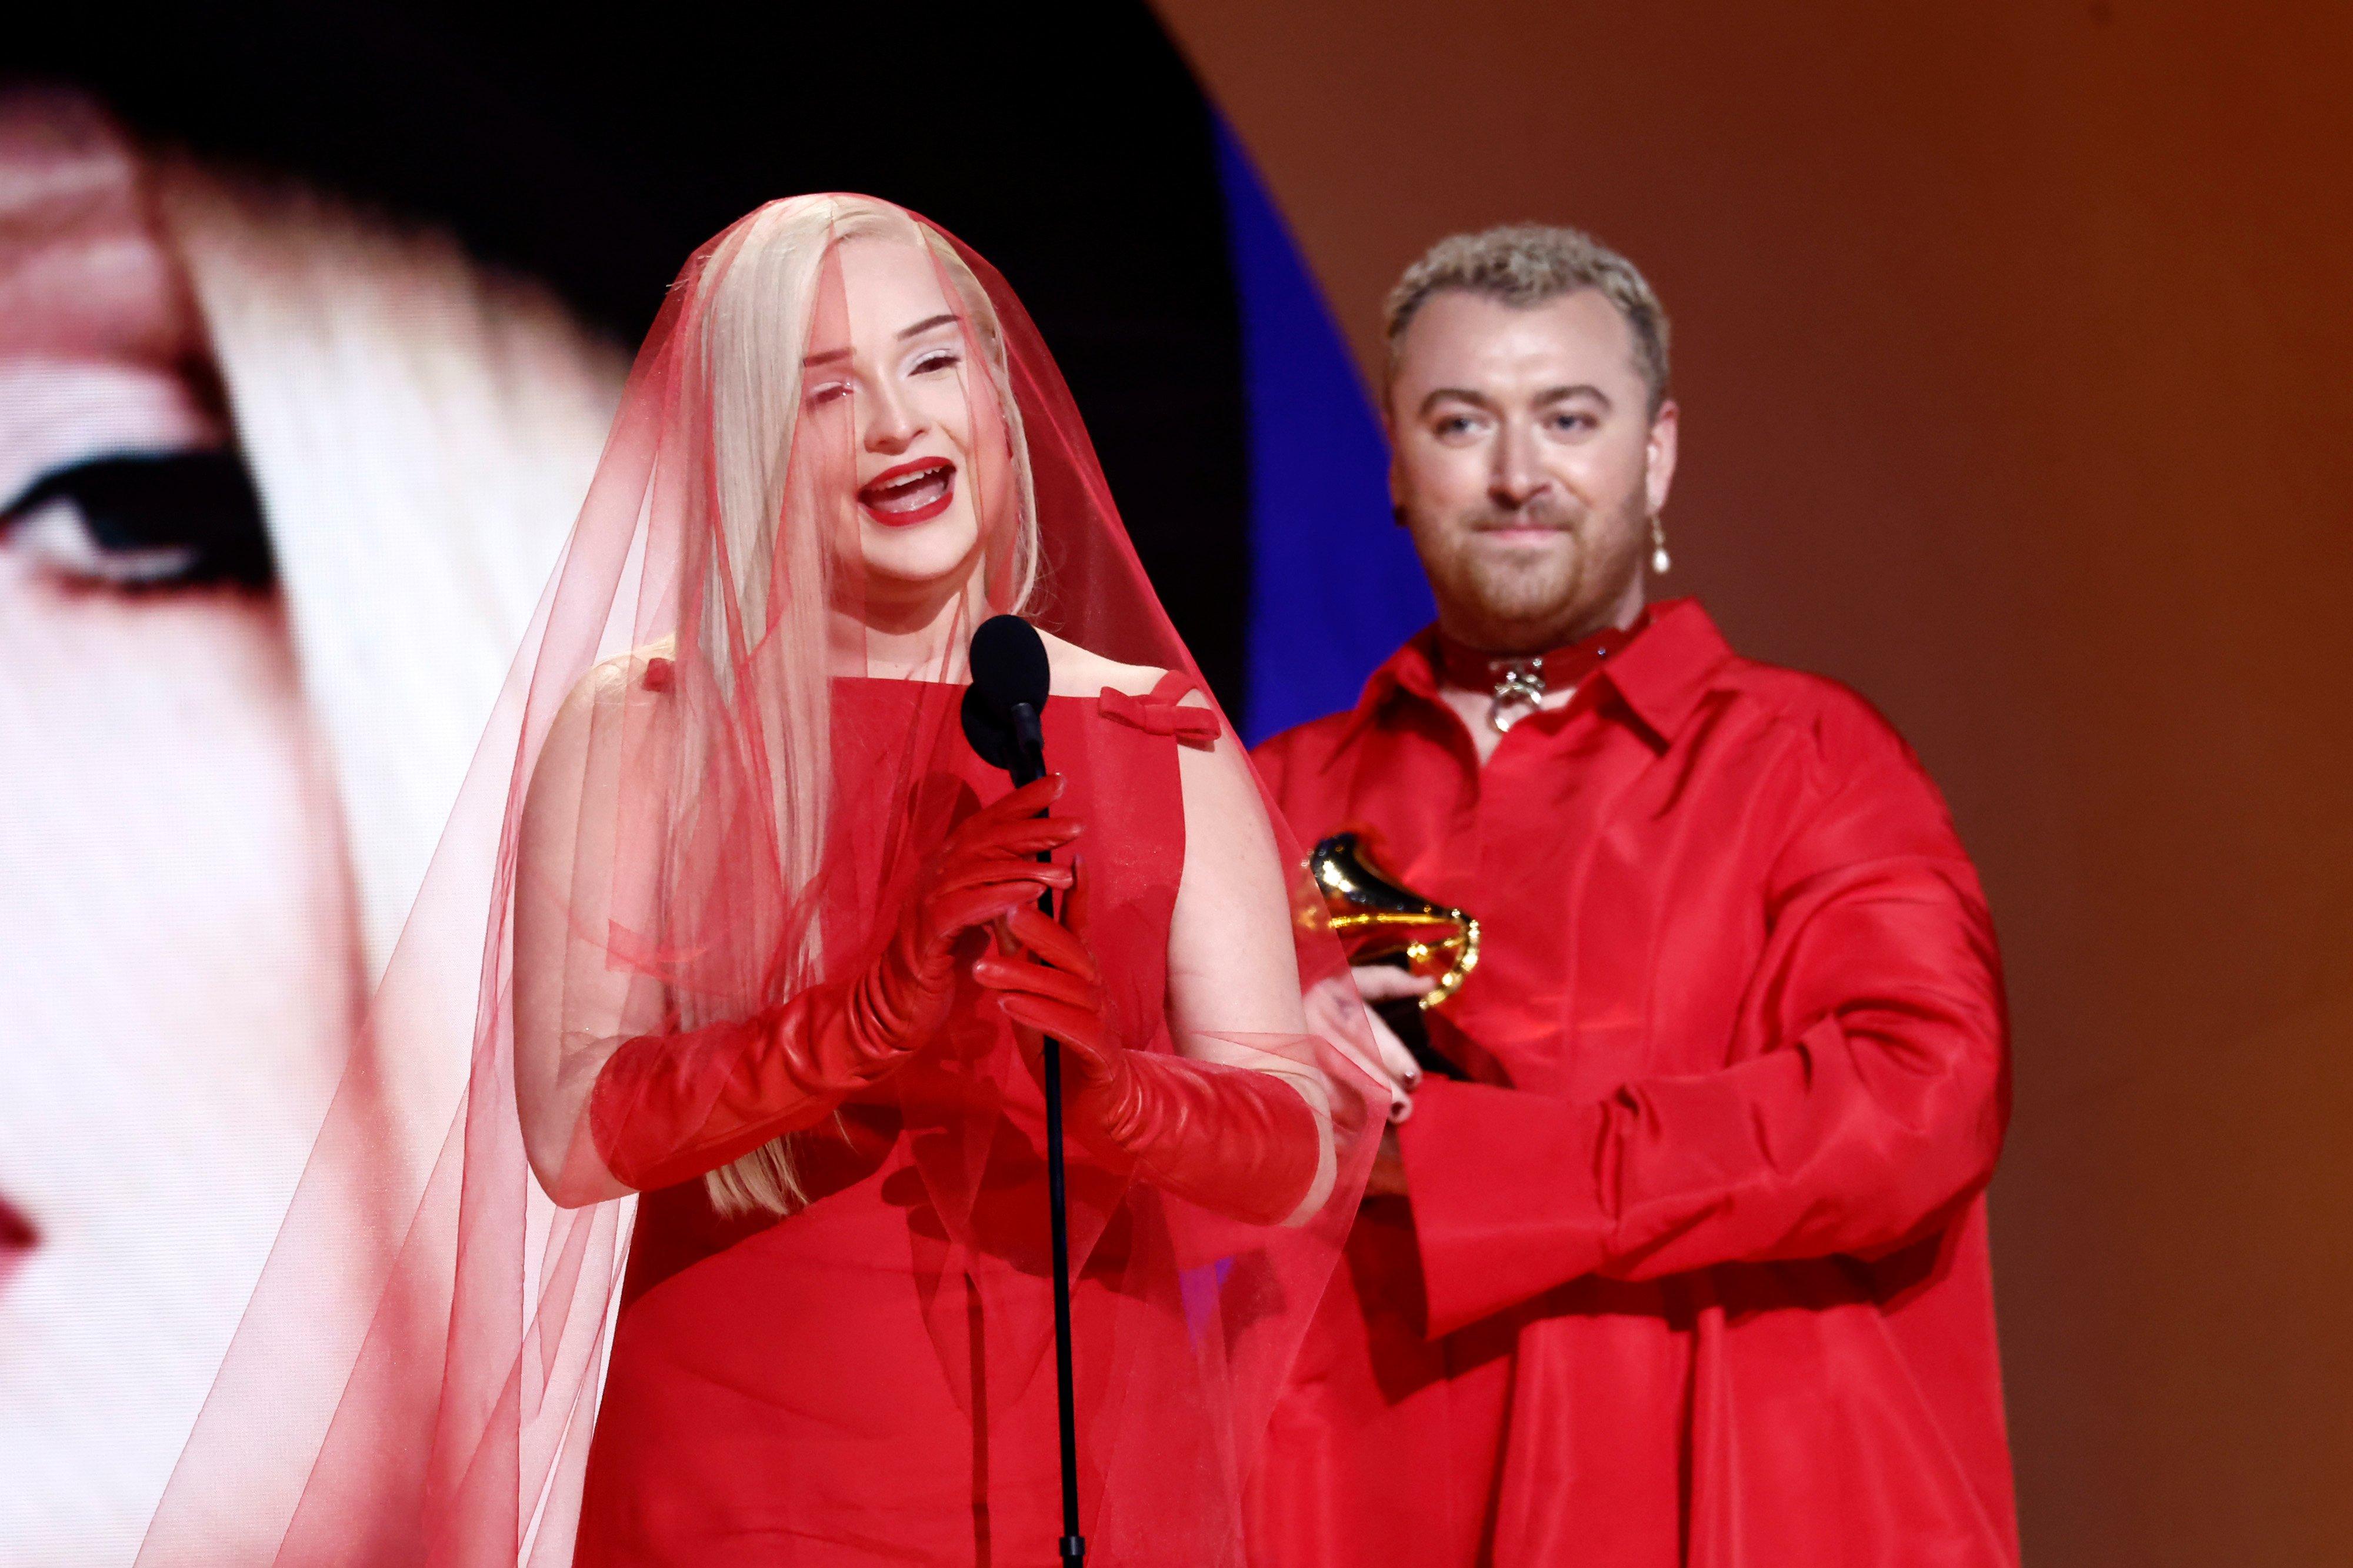 Photo of Sam Smith and Kim Petras winning the GRAMMY for Best Pop Duo/Group Performance at the 2023 GRAMMYs.